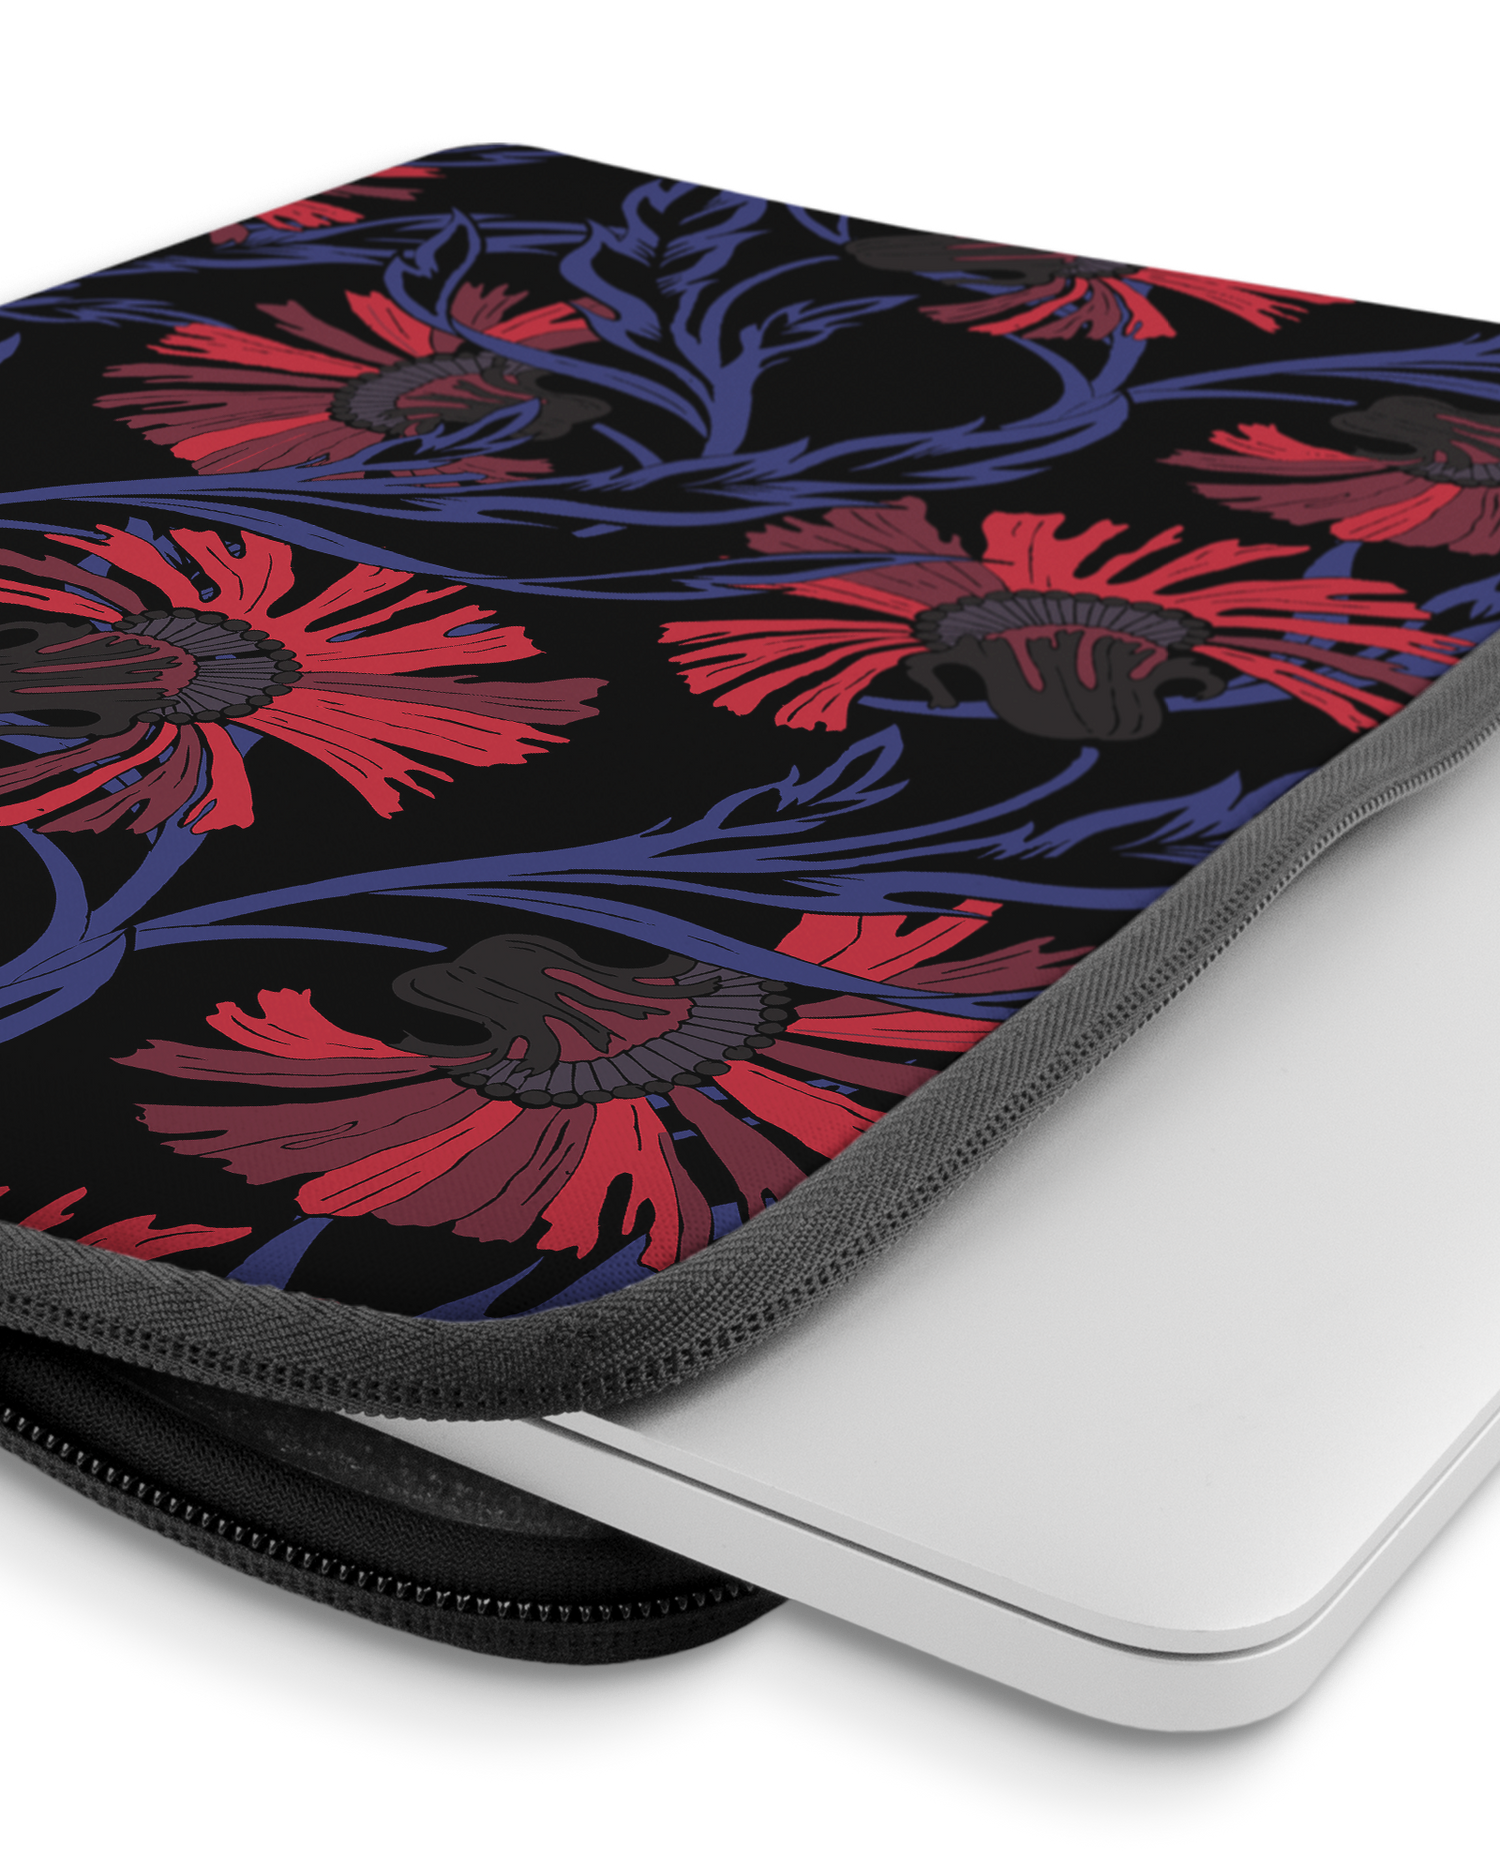 Midnight Floral Laptop Case 14 inch with device inside